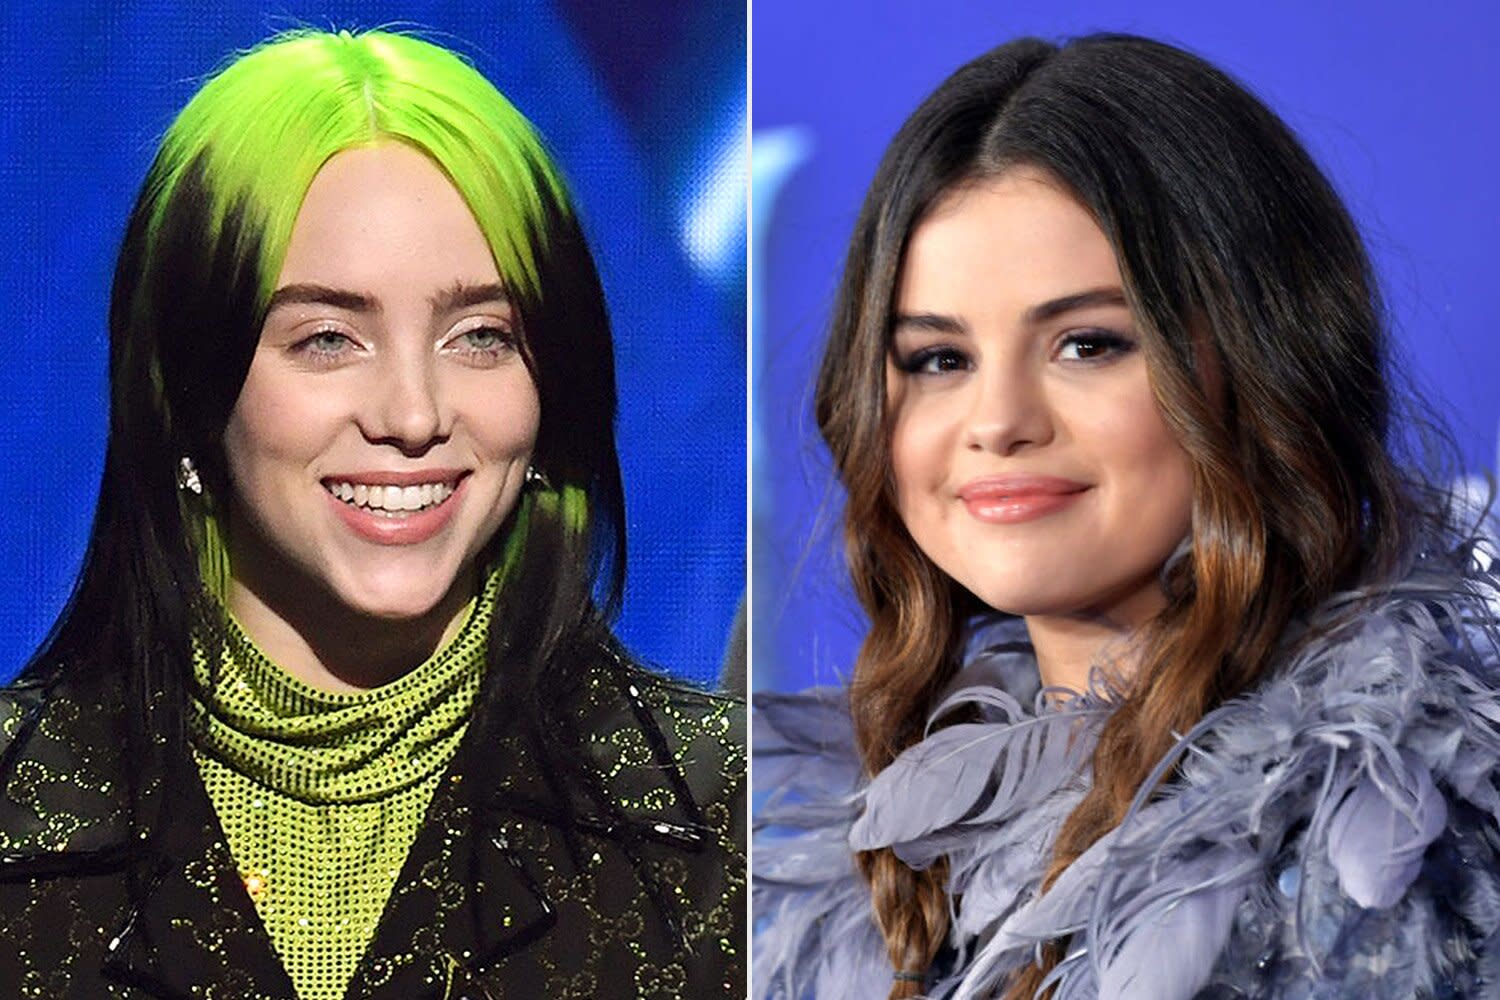 Selena Gomez Fangirls by Billie Eilish wearing Rare Beauty at Vanity Fair: ‘Low Key Freaking Out’